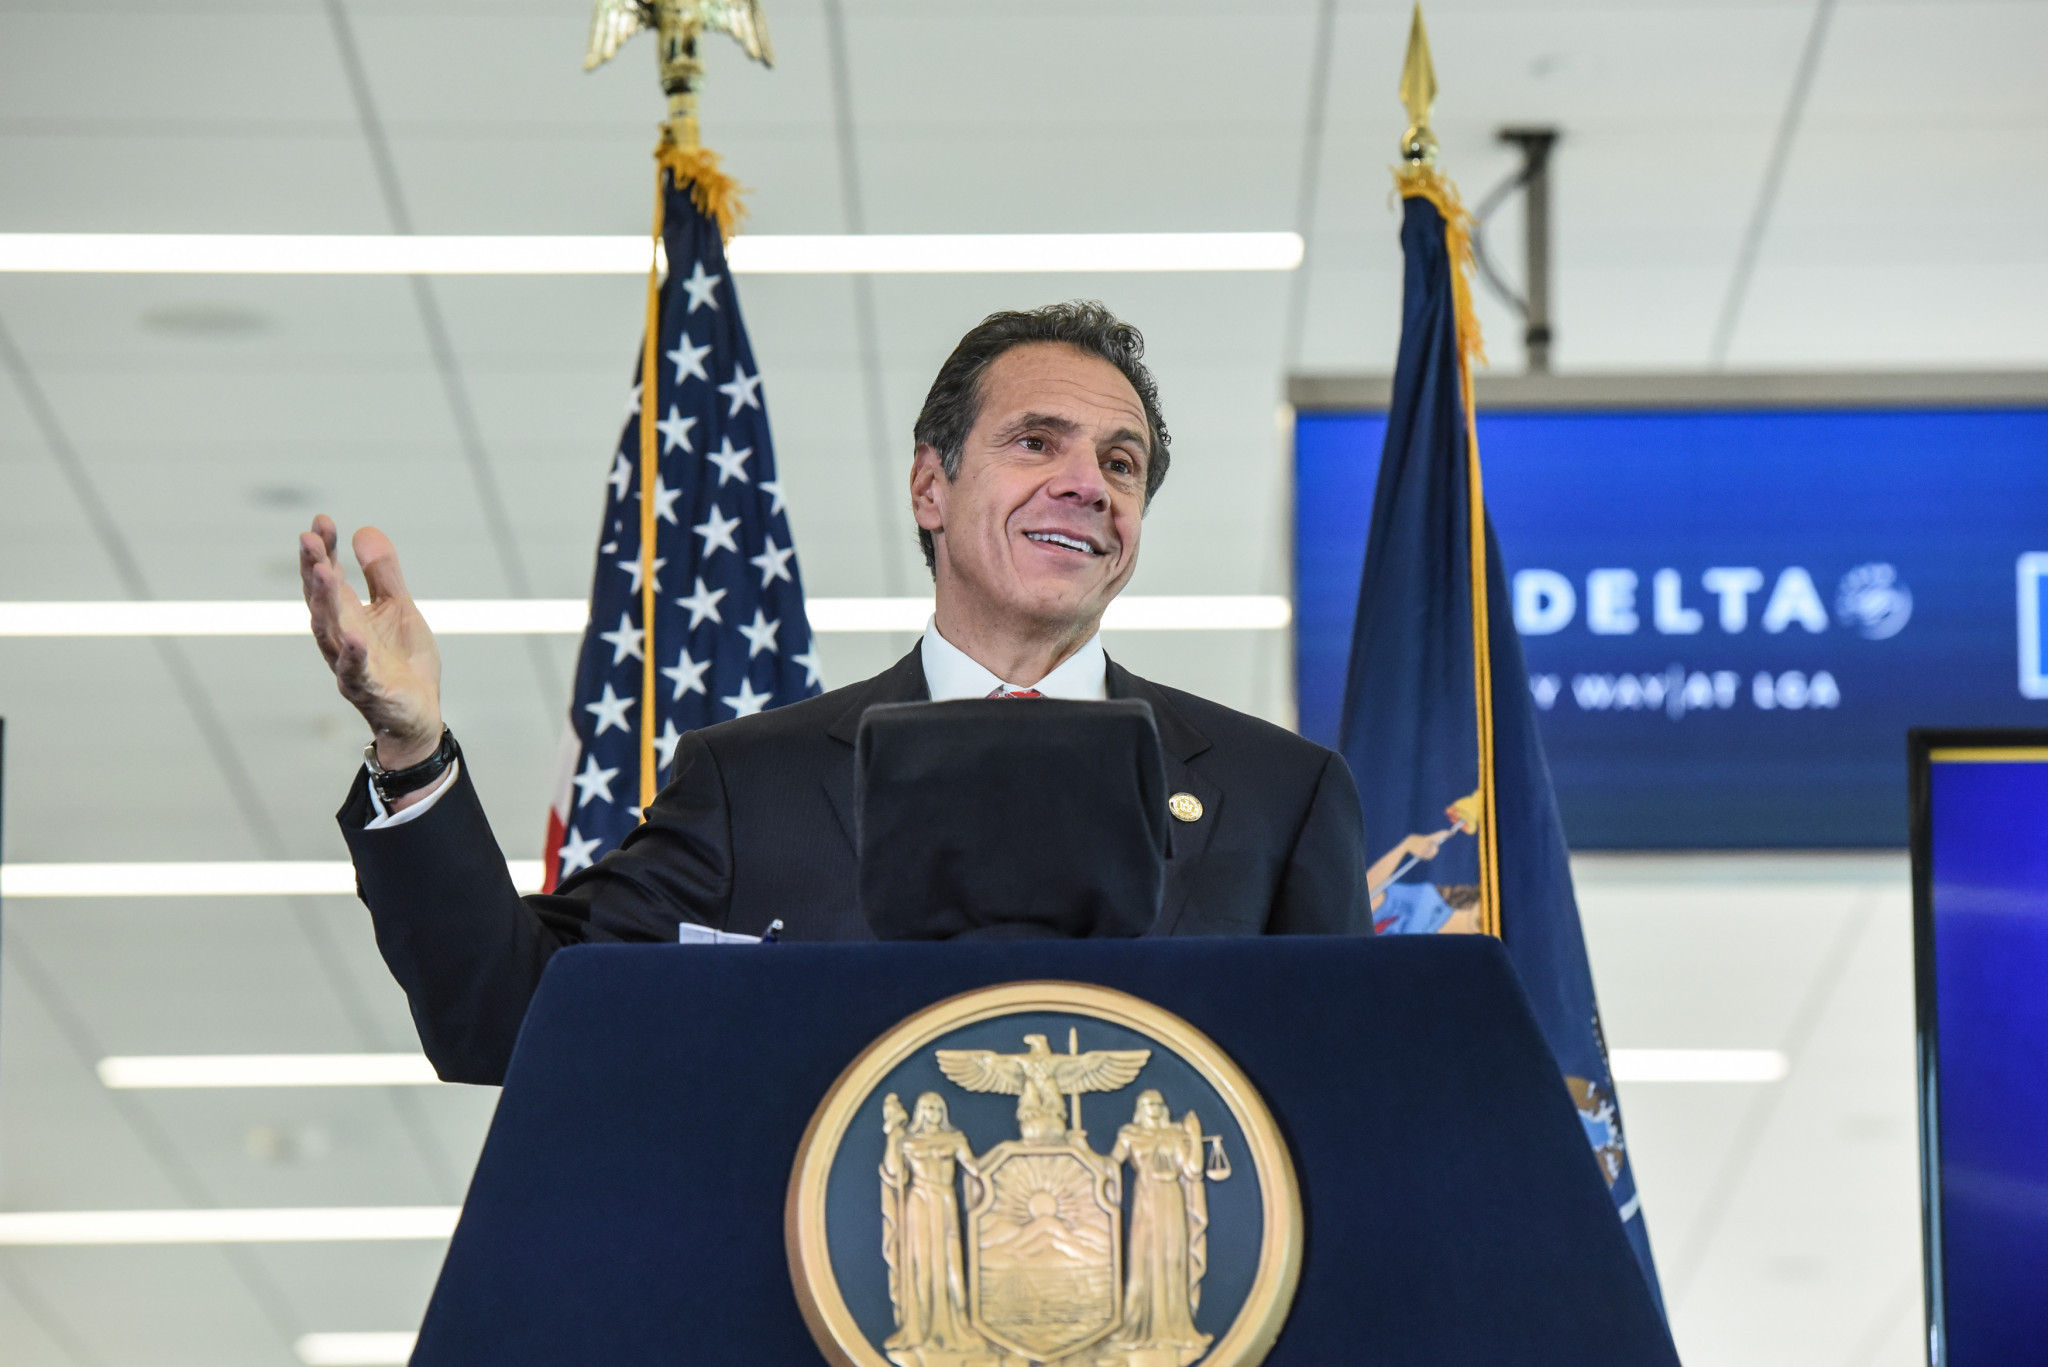 New York Governor Andrew Cuomo has proposed $147 million in new capital funding for the State's ORDA to keep upgrading winter sports venues ©Getty Images